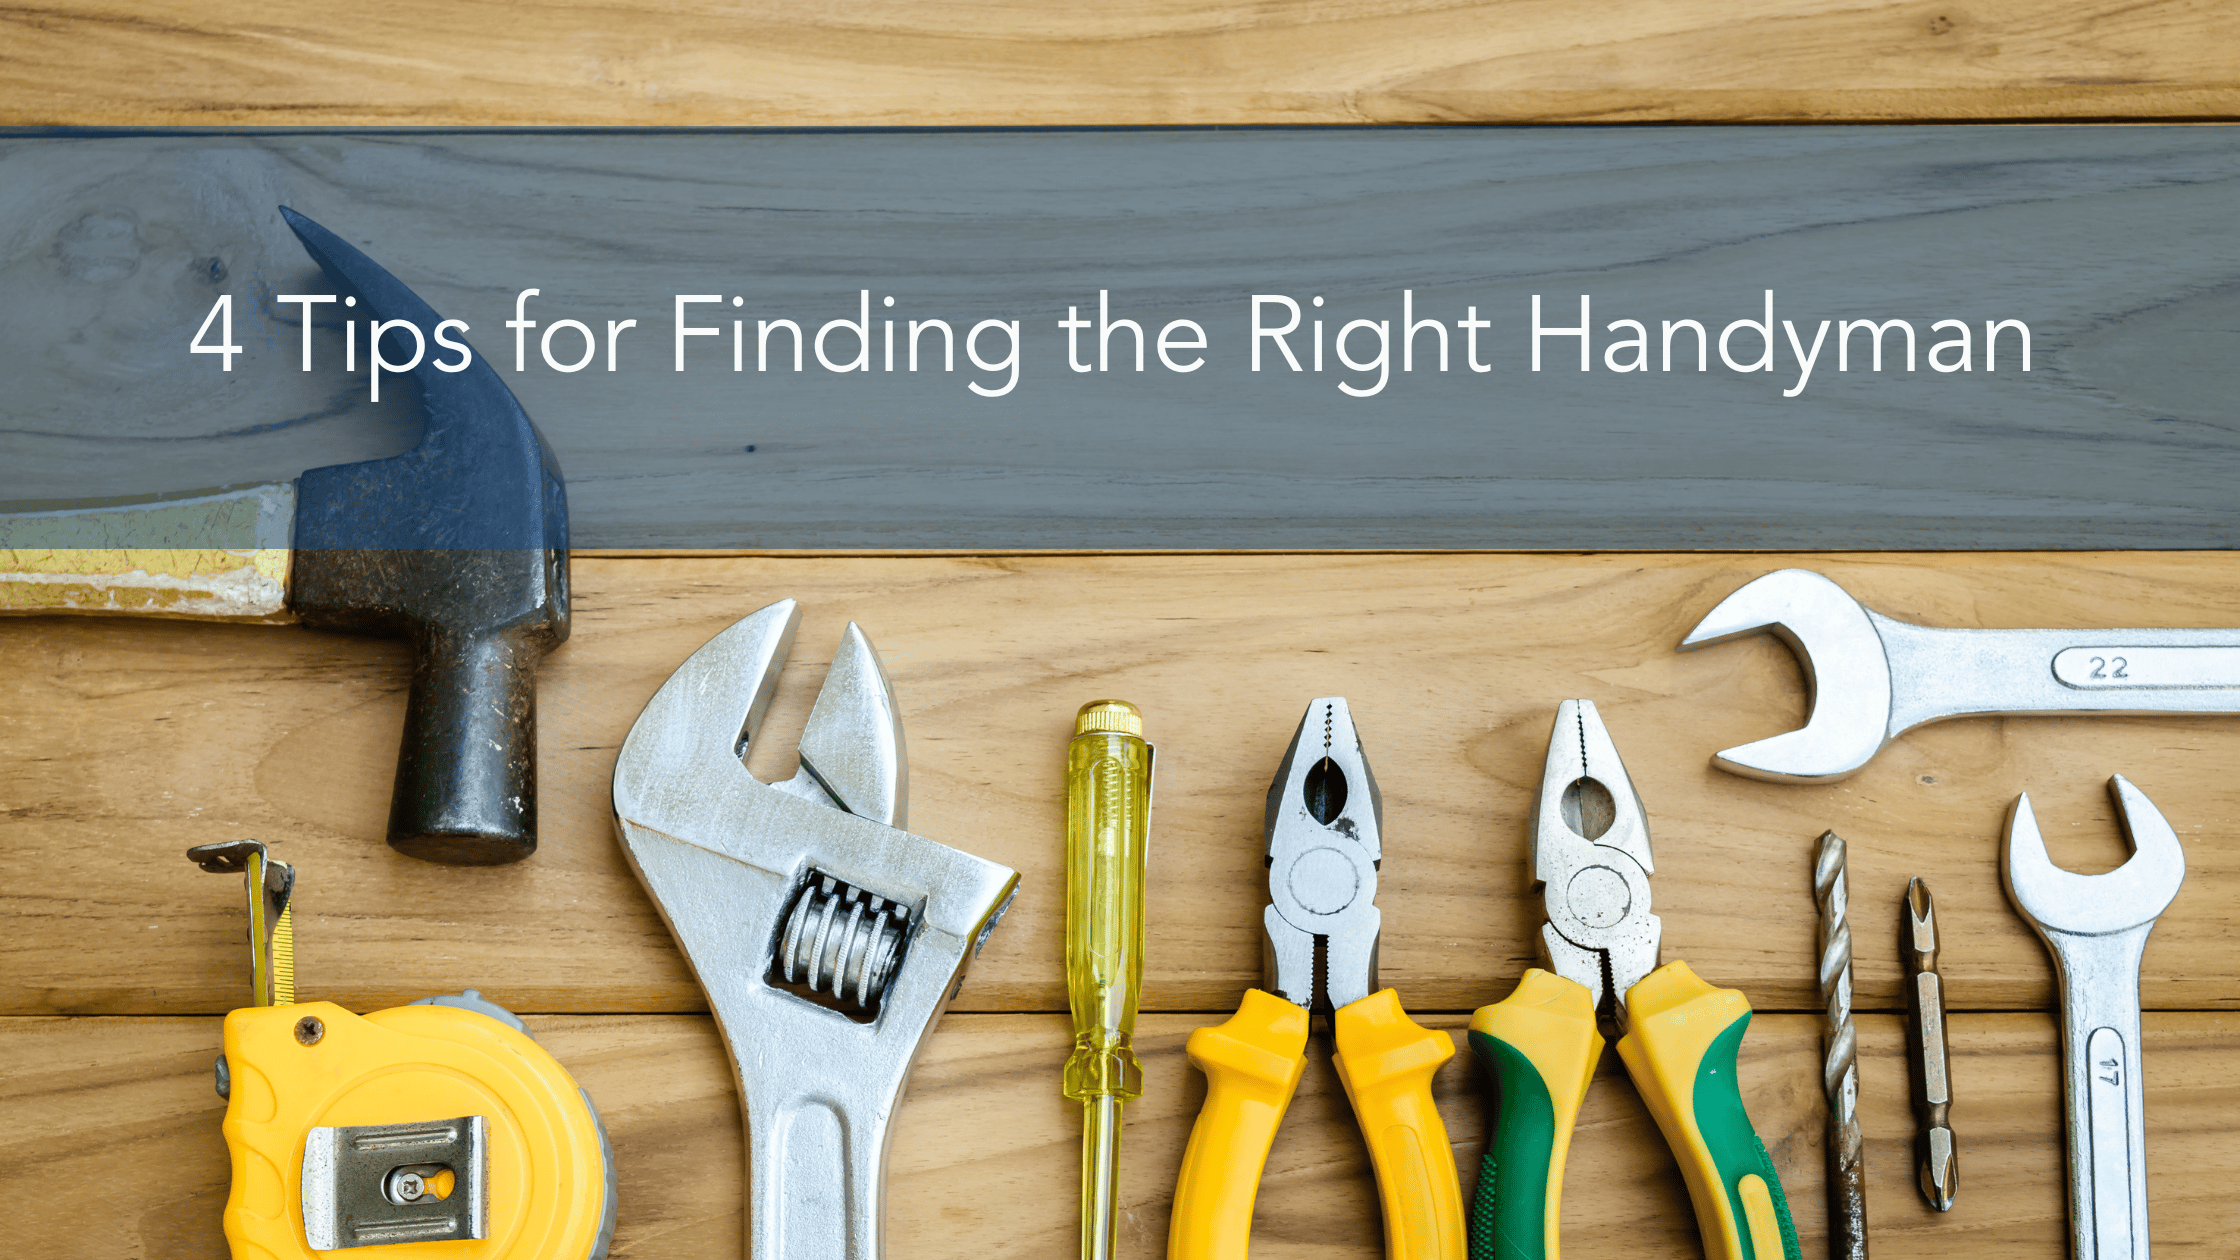 https://雷竞技下载链接官网appwww.explorizers.com/wp-content/uploads/2023/02/4-Tips-for-Finding-the-Right-Handyman.png